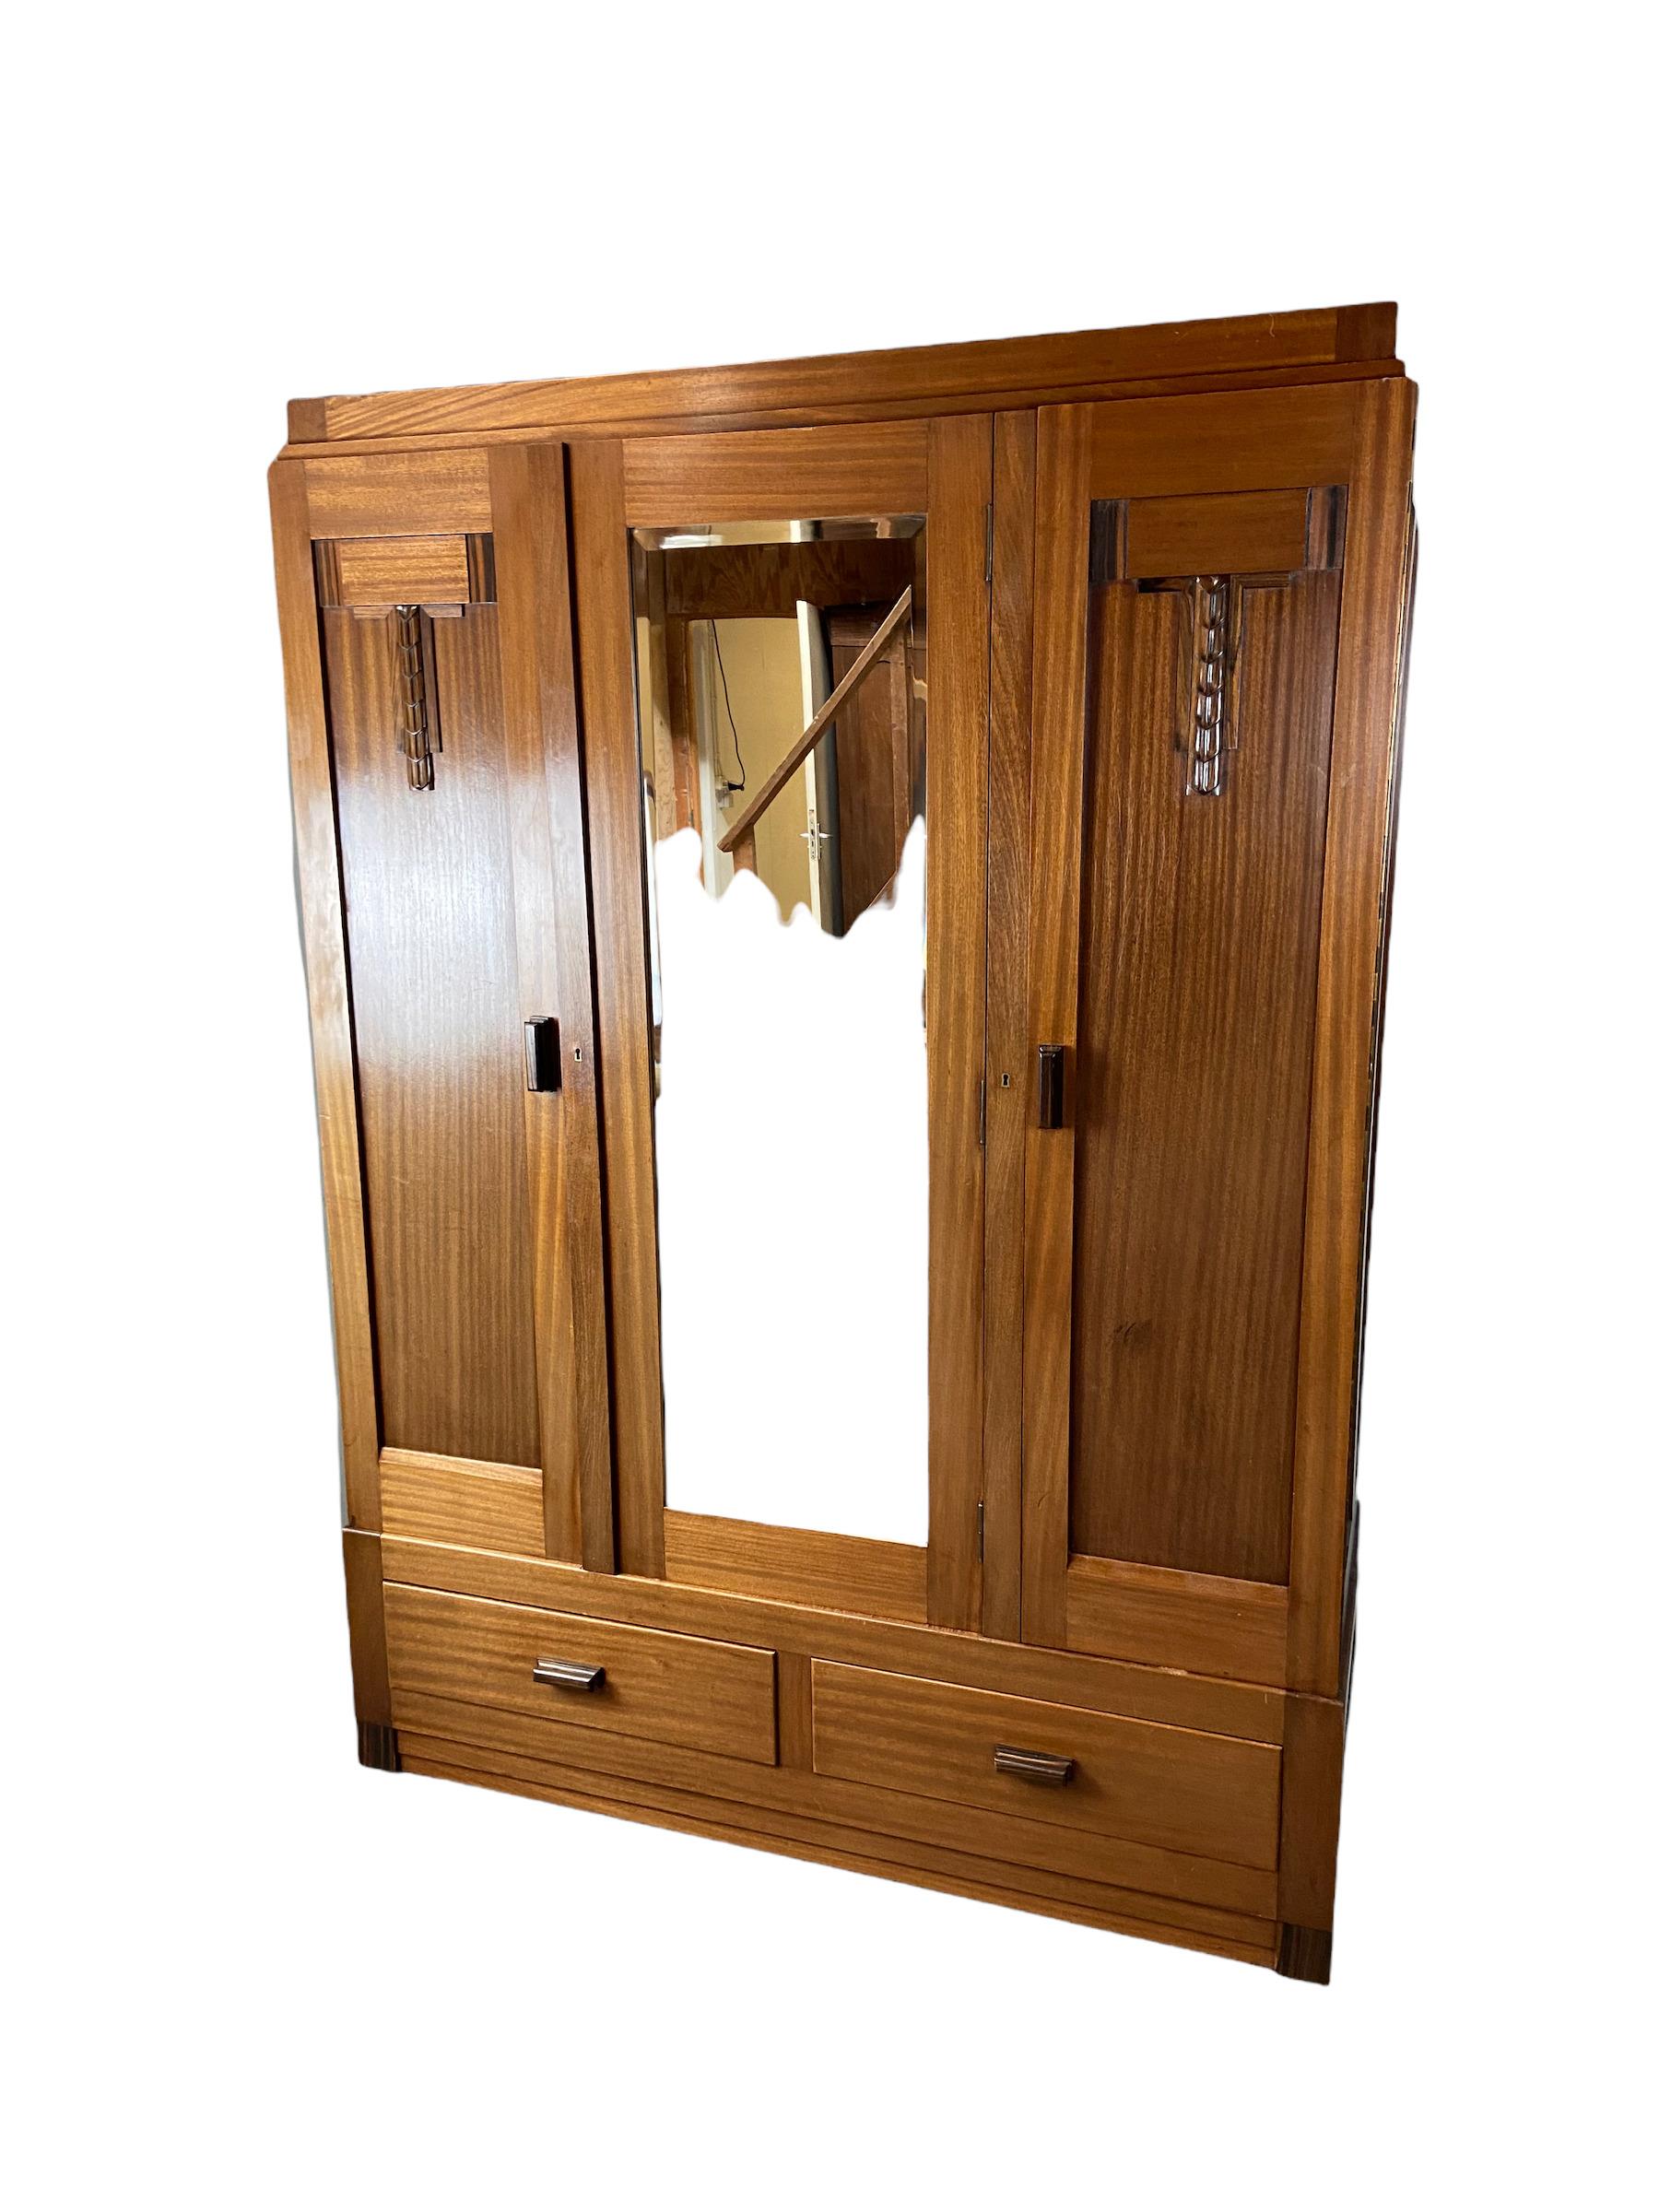 Amsterdam School wardrobe made of mahogany wood with coromandel accents and massive oak shelves and a faceted mirror. Dutch design from the 1920s. This object is in a good condition but there are no keys.